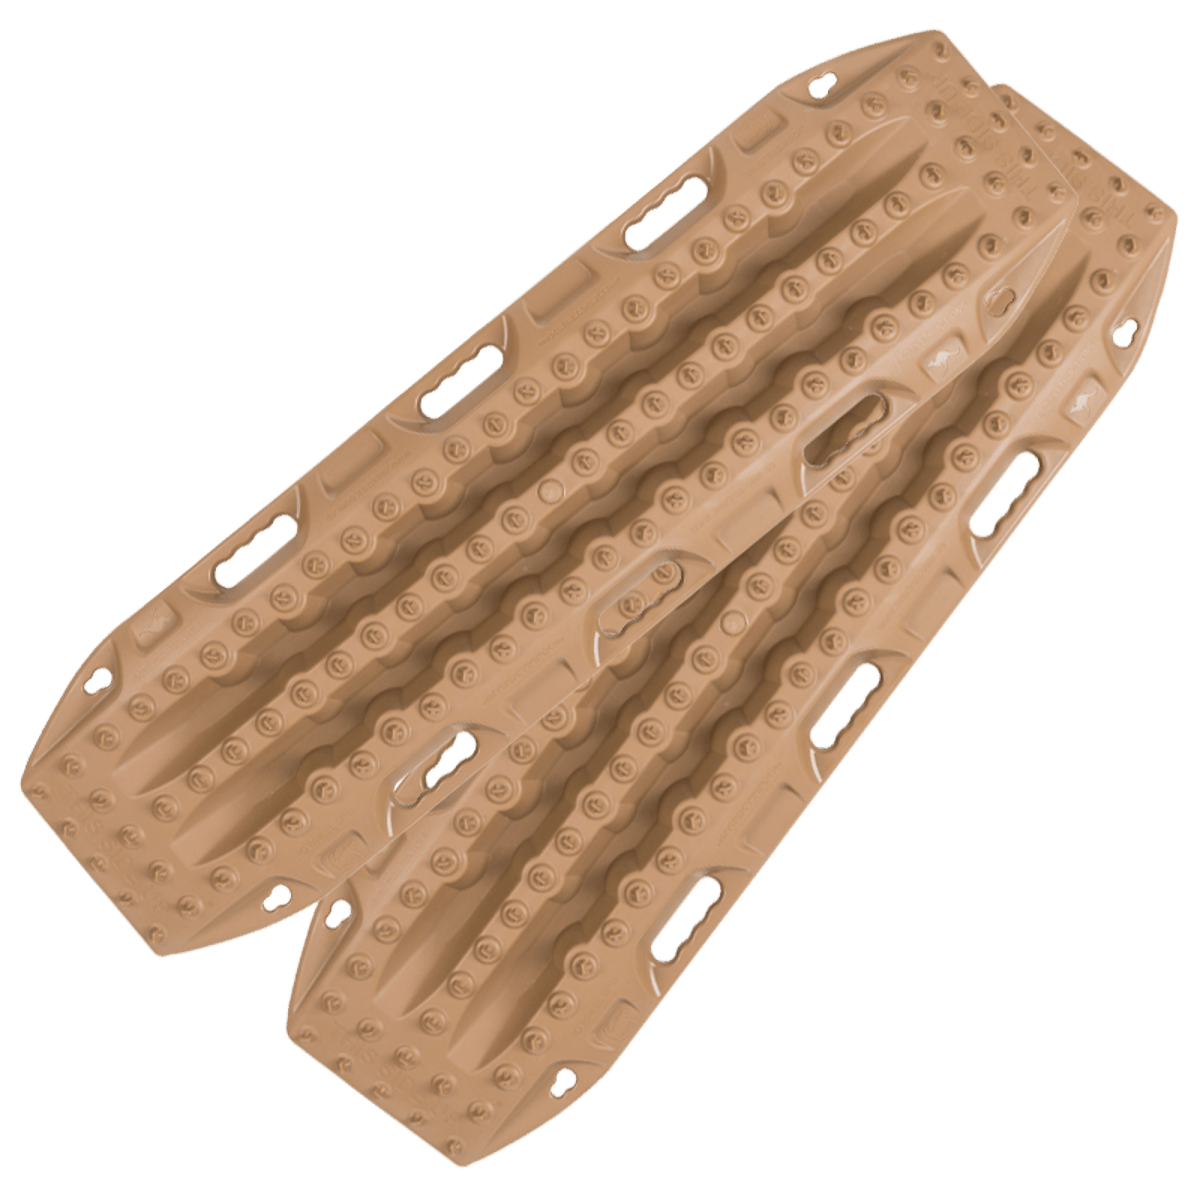 MAXTRAX MKII Desert Tan Recovery Boards - Overland Bound